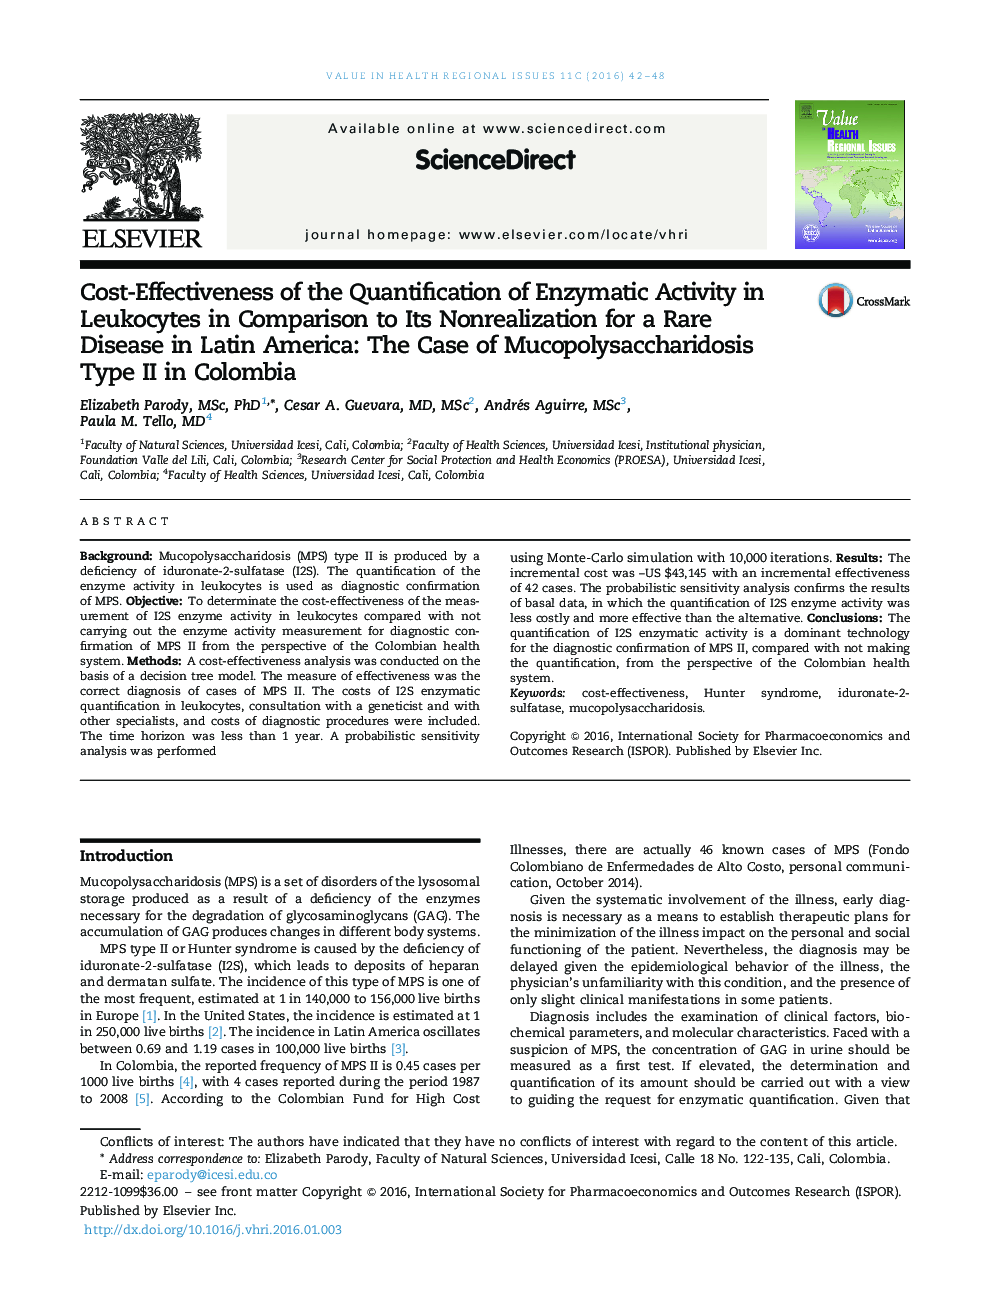 Cost-Effectiveness of the Quantification of Enzymatic Activity in Leukocytes in Comparison to Its Nonrealization for a Rare Disease in Latin America: The Case of Mucopolysaccharidosis Type II in Colombia 